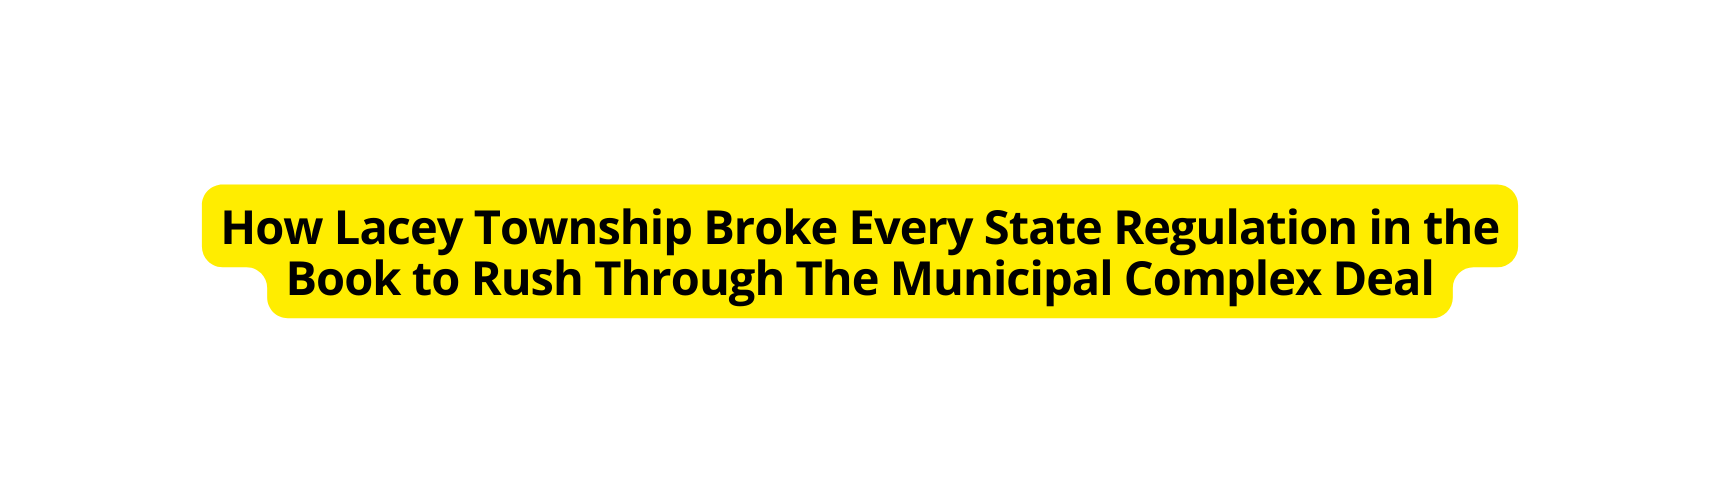 How Lacey Township Broke Every State Regulation in the Book to Rush Through The Municipal Complex Deal